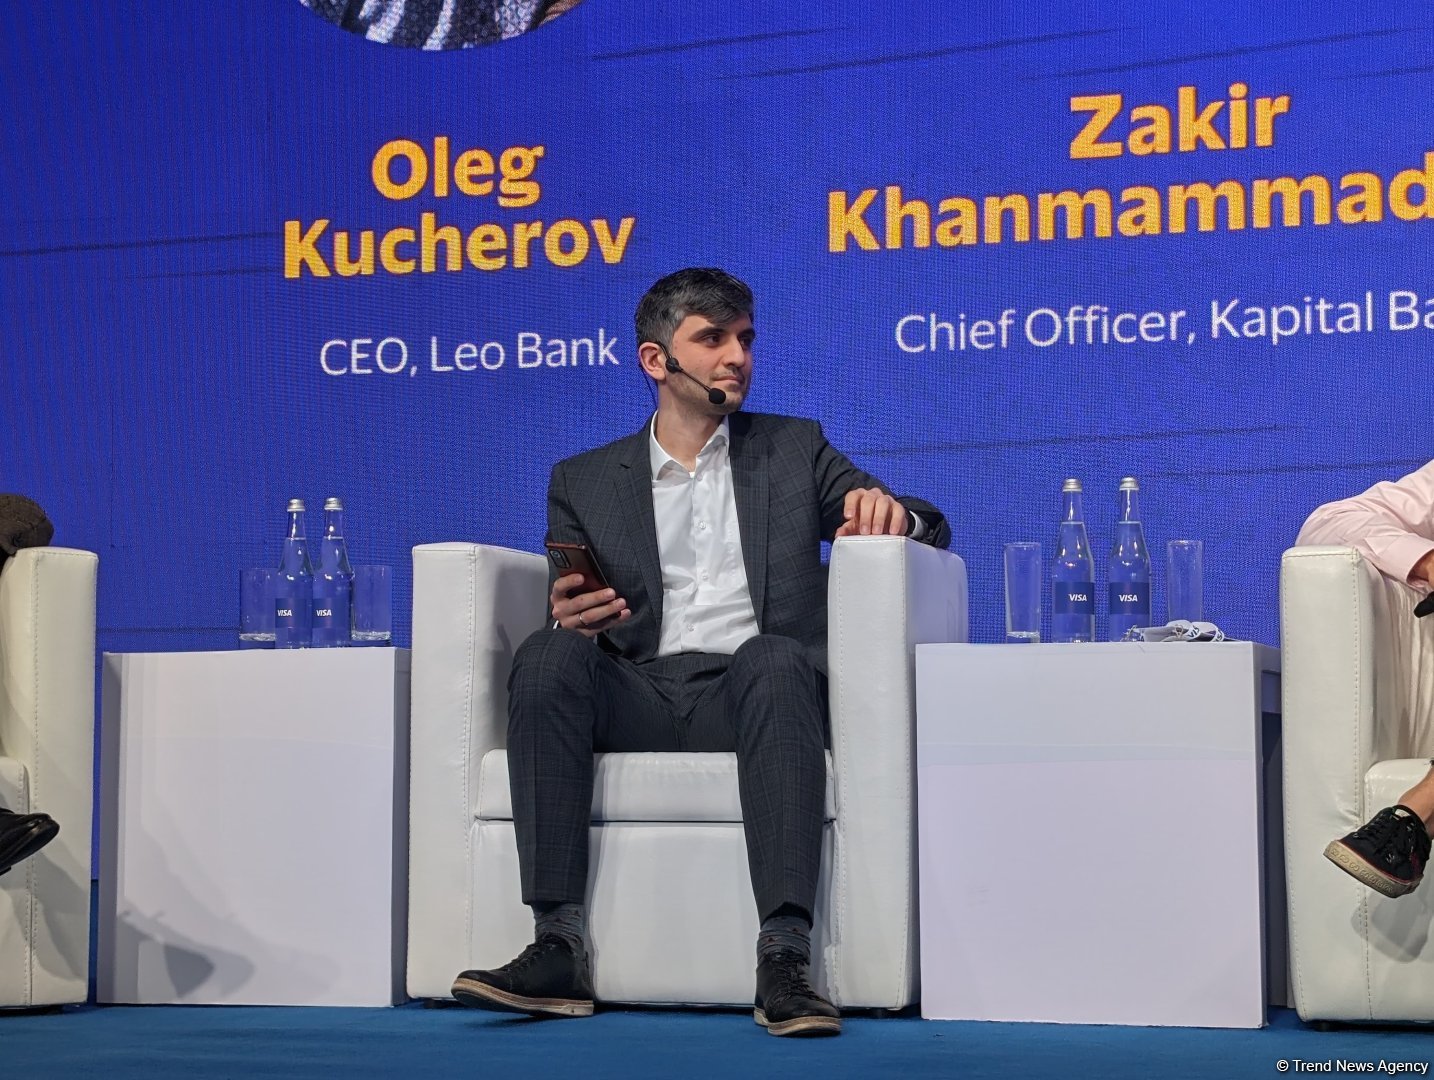 Azerbaijani Kapital Bank actively invests in new technology development